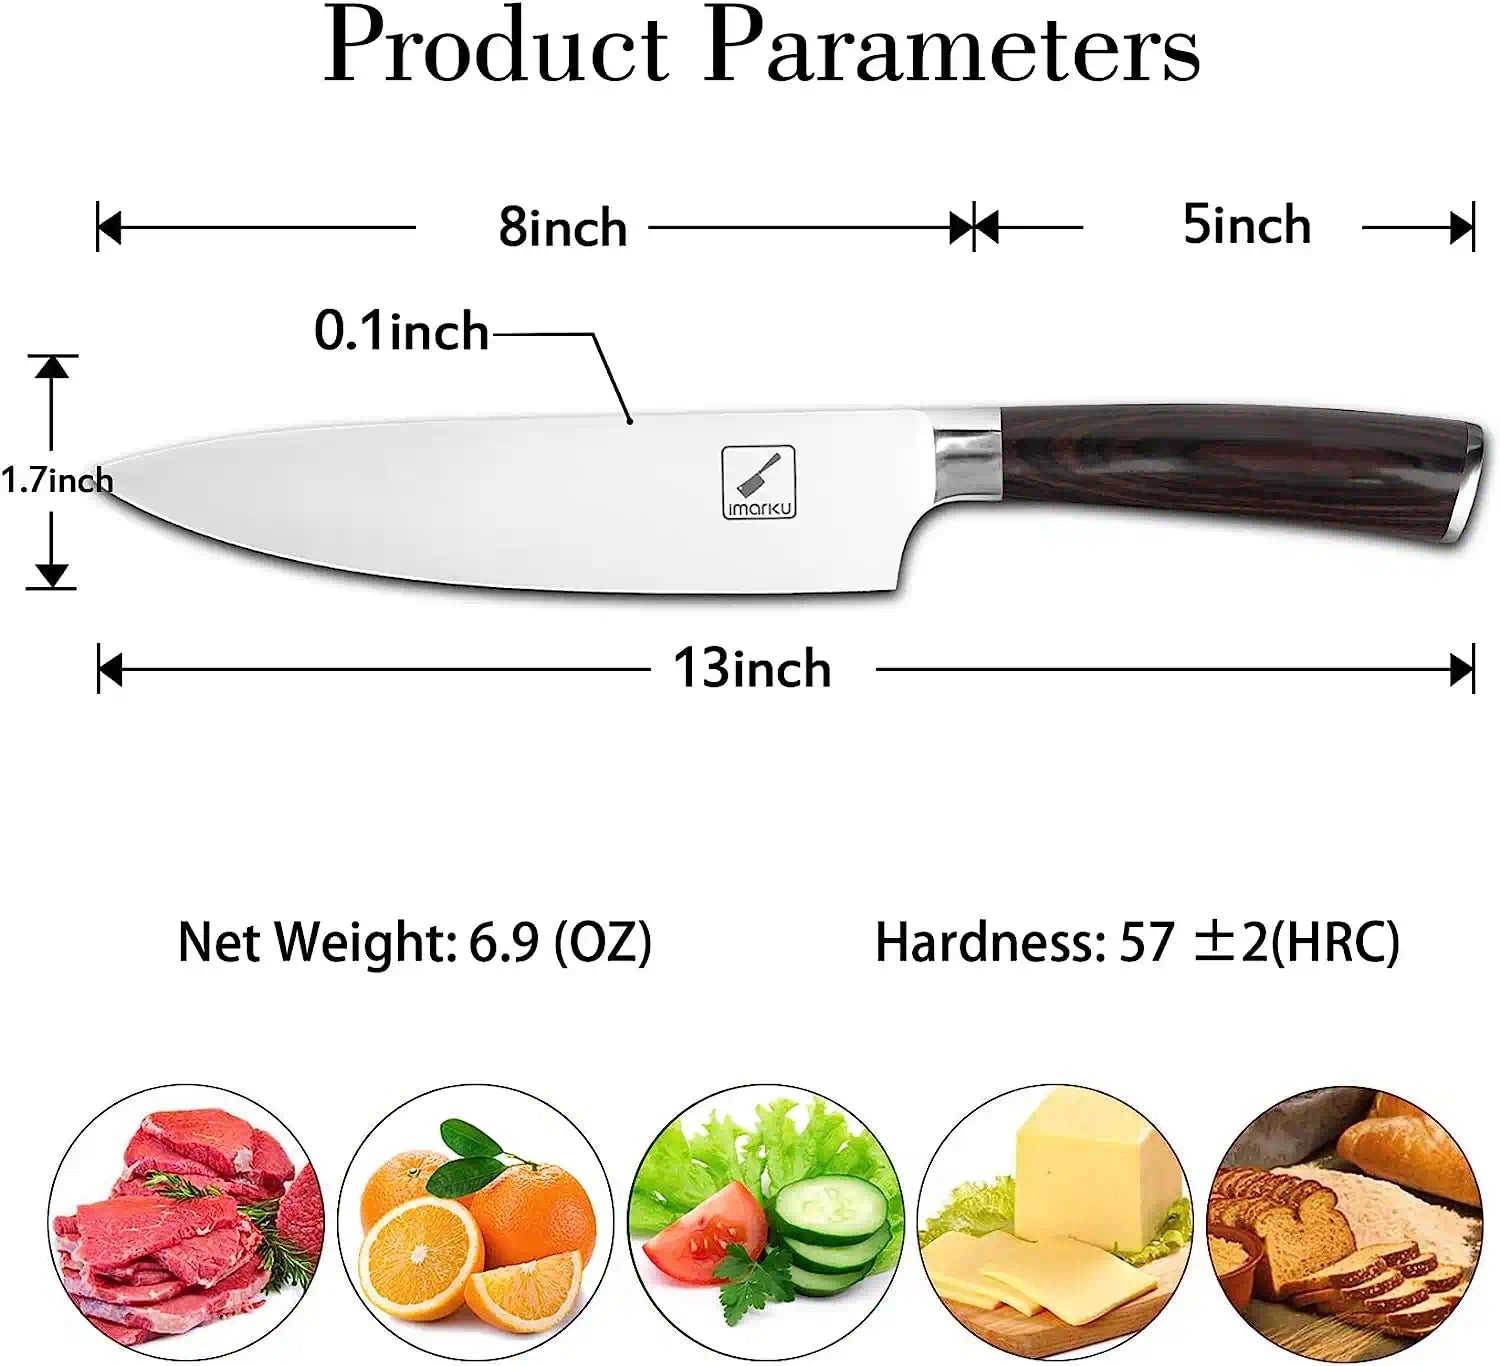 8 inch chef knife product parameters